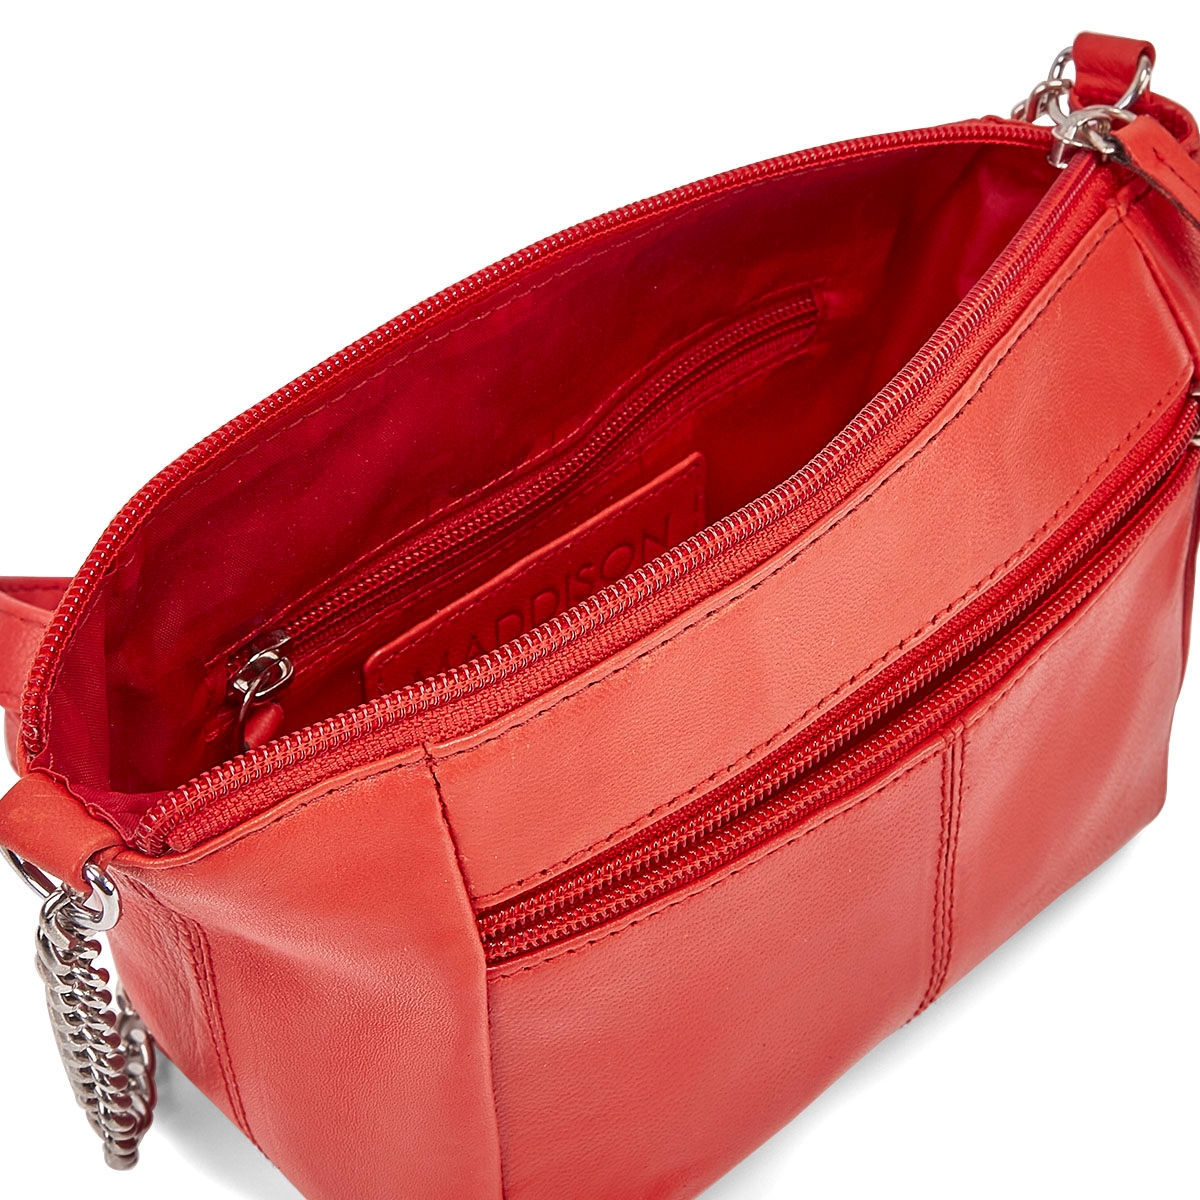 Women's 1038 red sheep leather crossbody bag